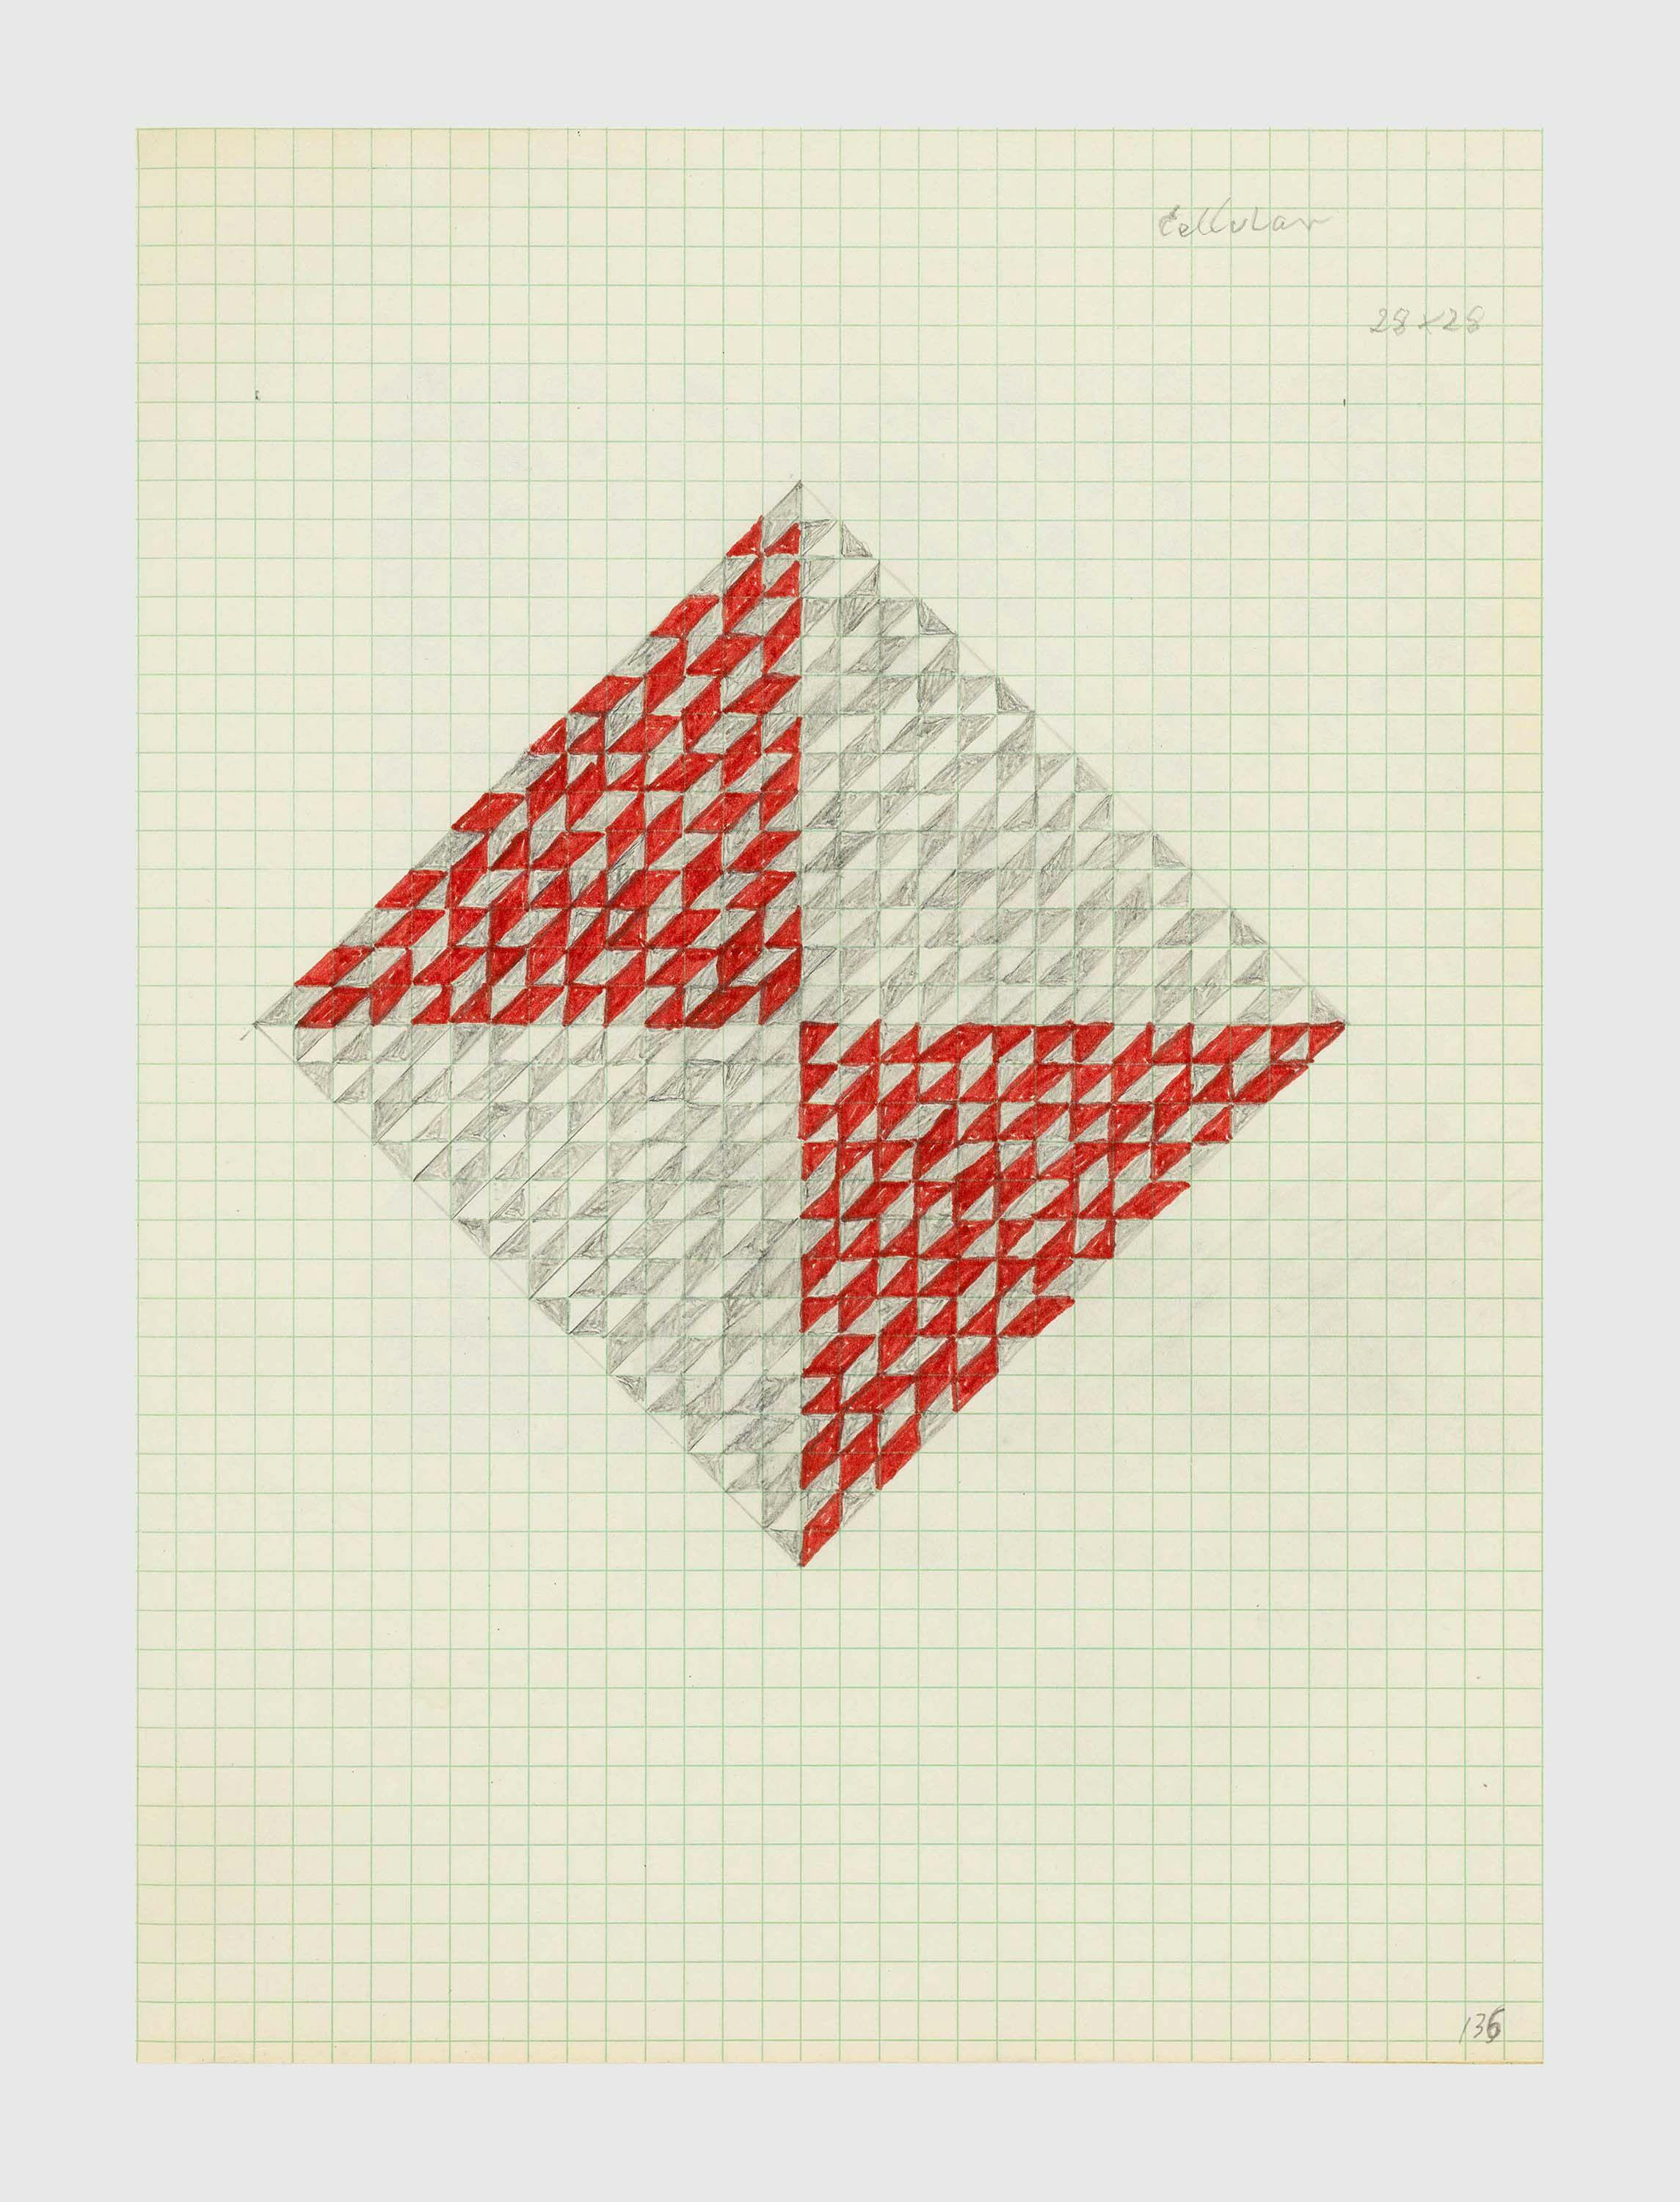 A drawing by Anni Albers, titled Drawing from a Notebook, date unknown.